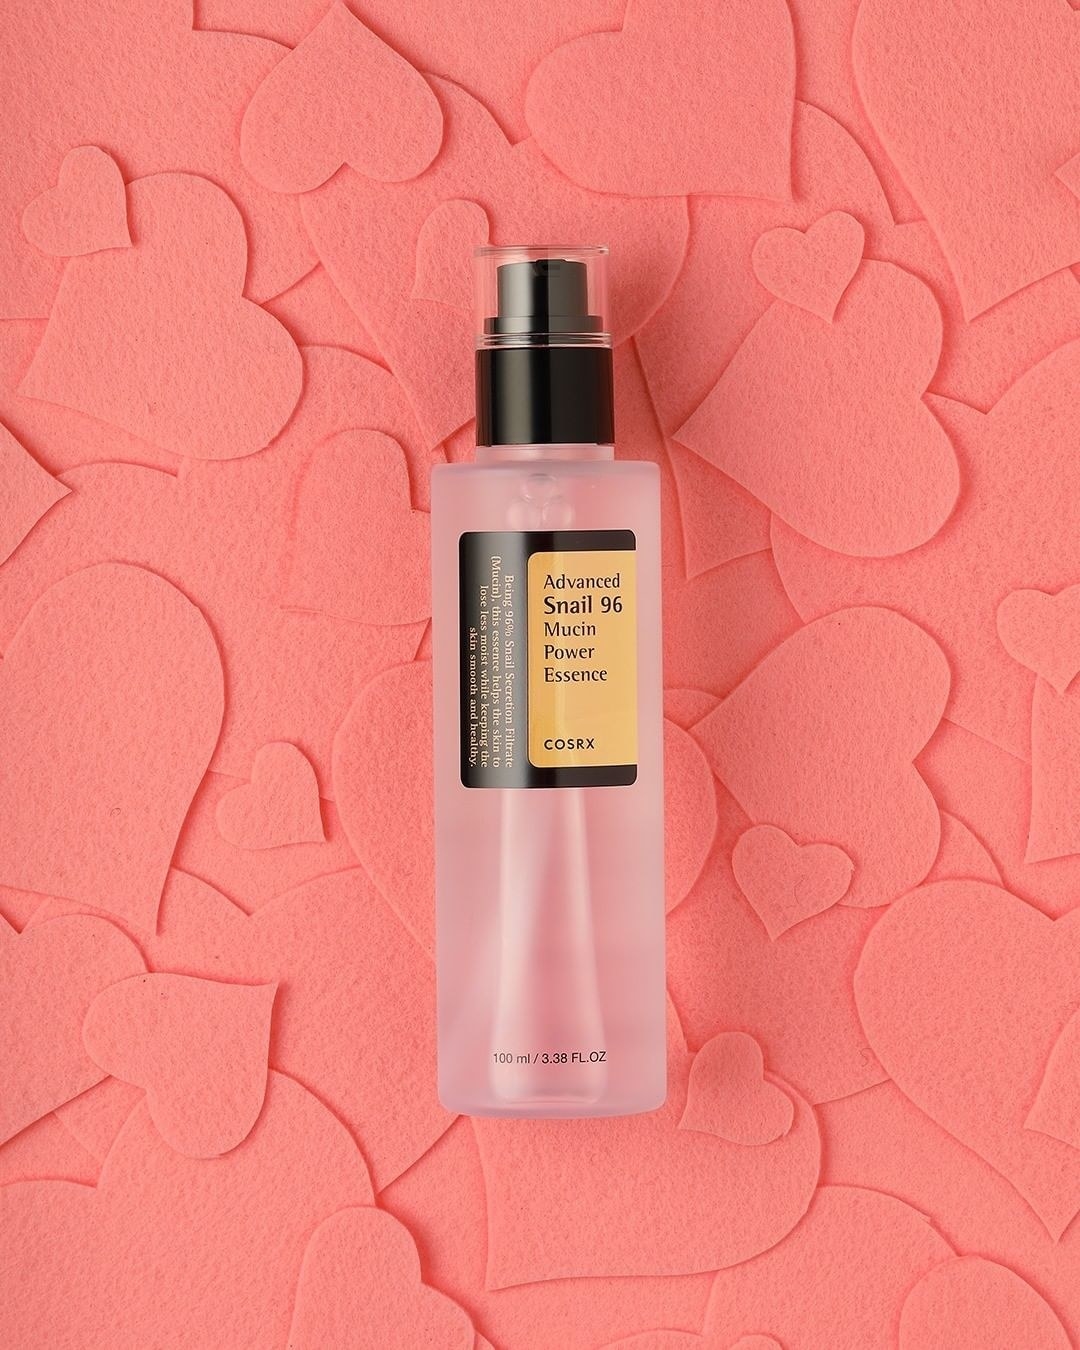 A bottle of essence on a background of felt hearts